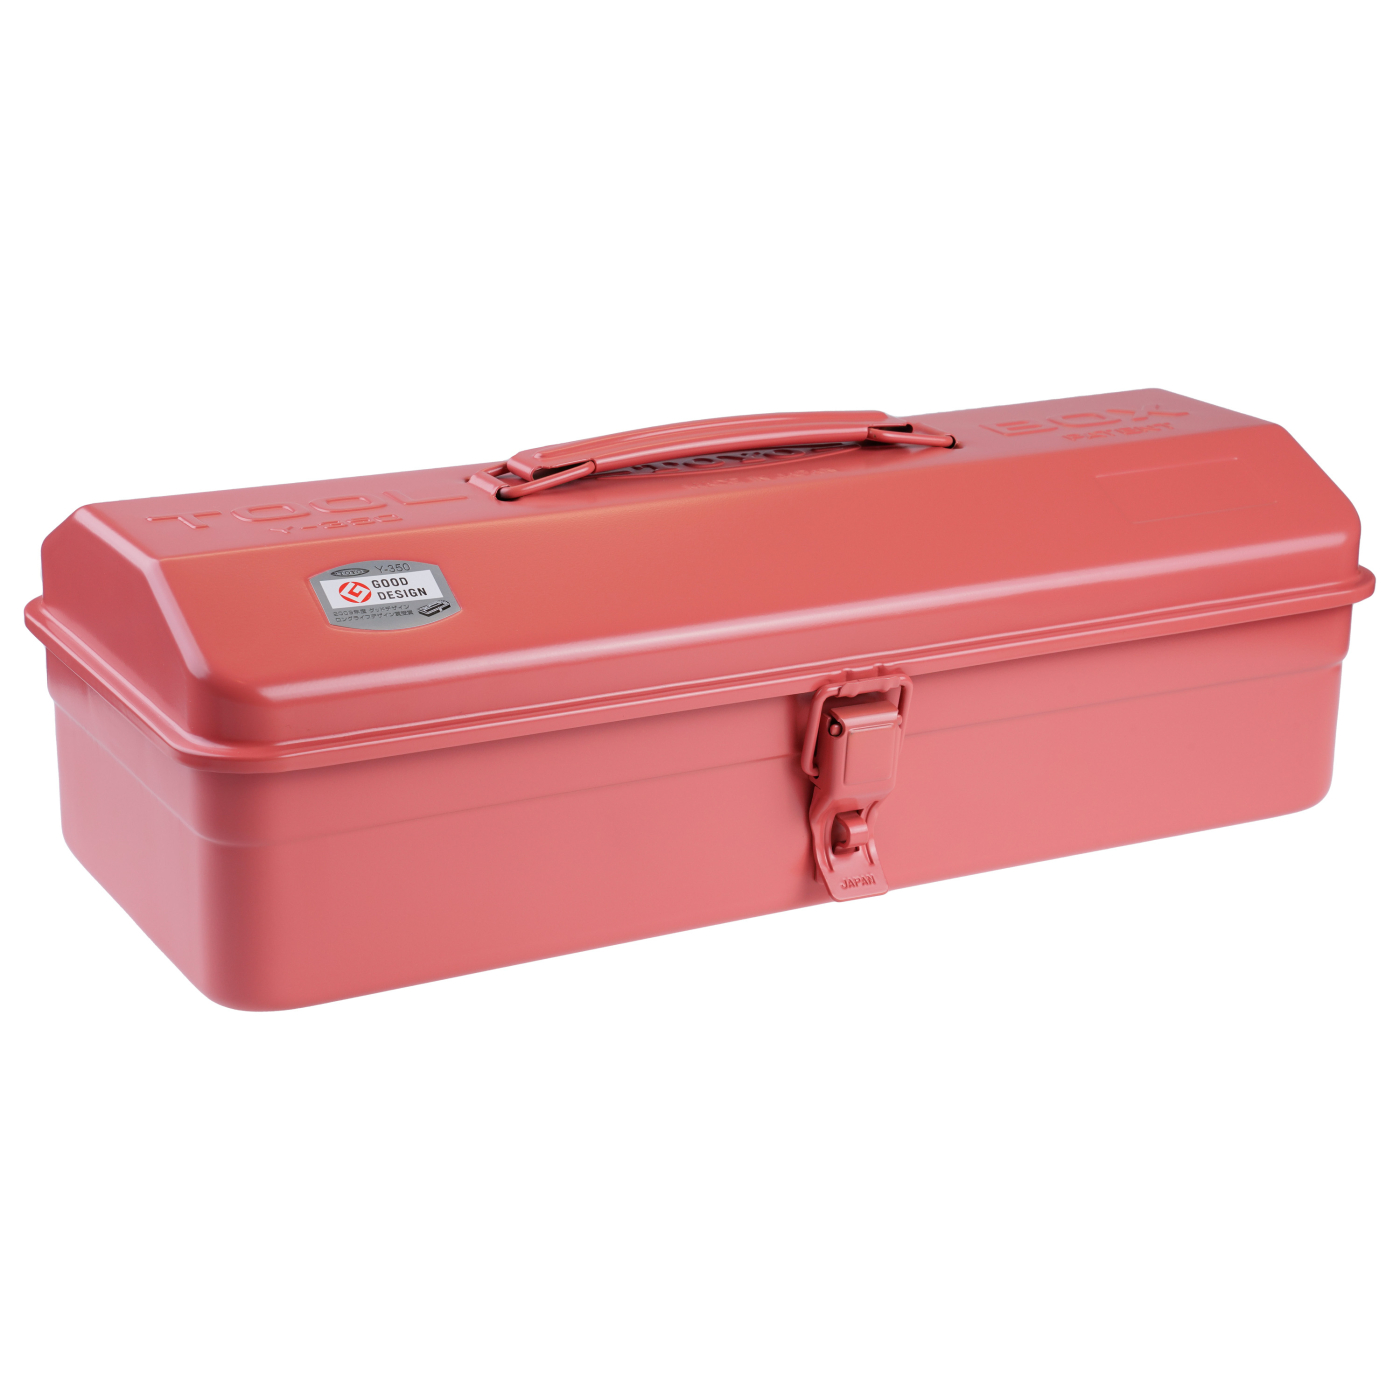 TOYO Steel Company Y350 Camber Top Toolbox Pink